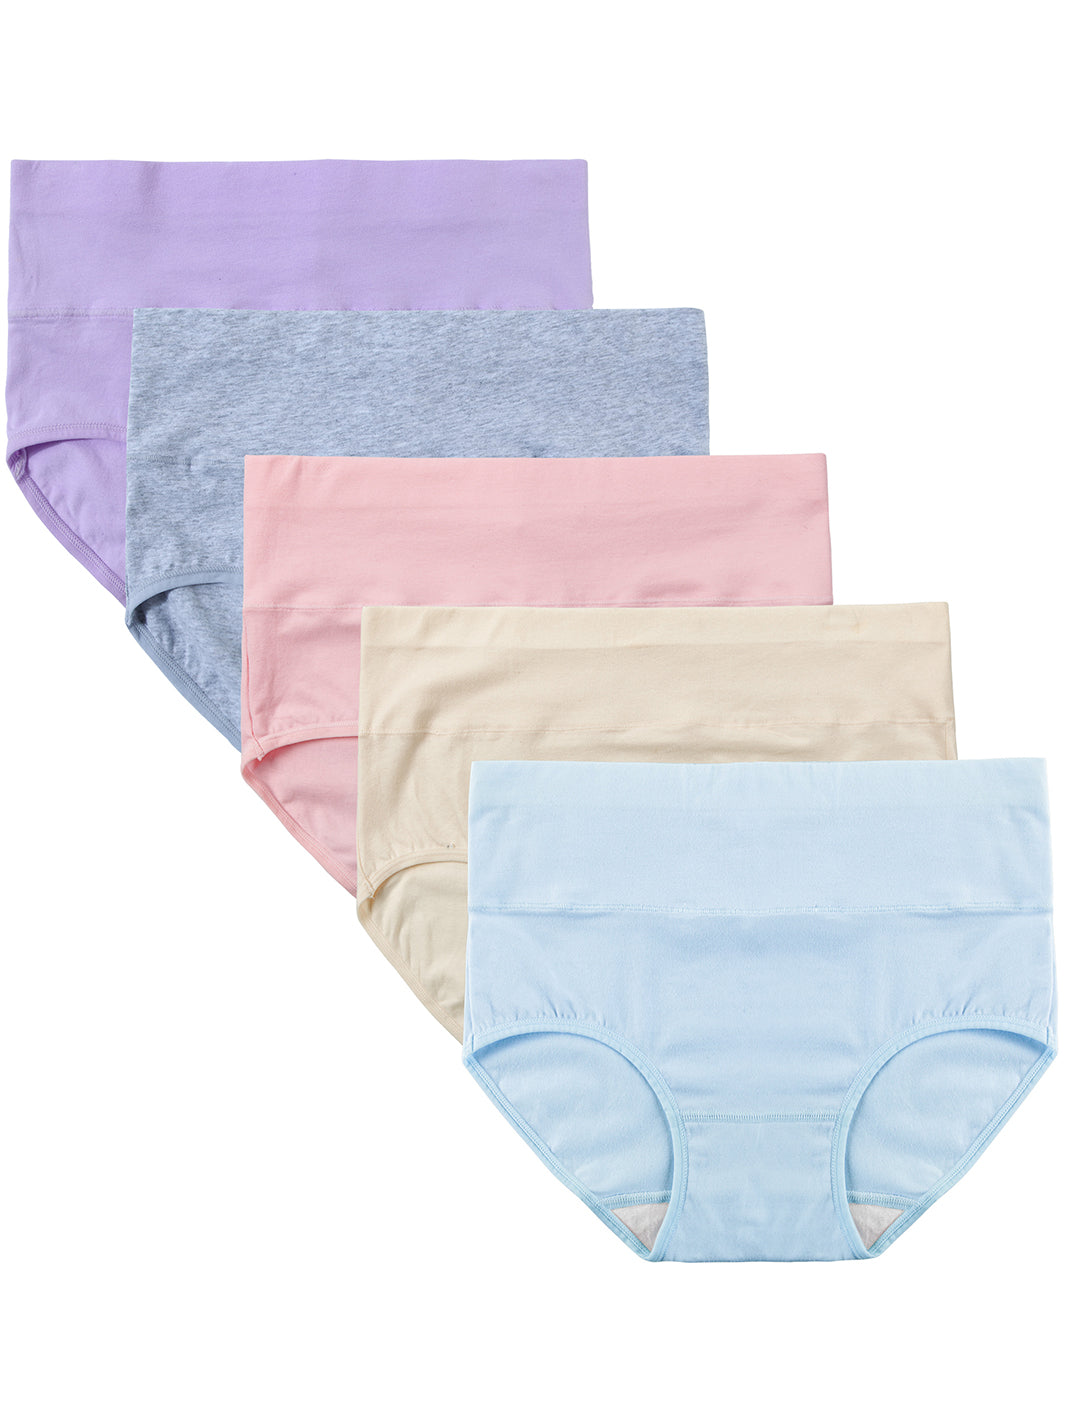 Women's Plus Size Briefs 5-Pack XL-5XL – Innersy Store